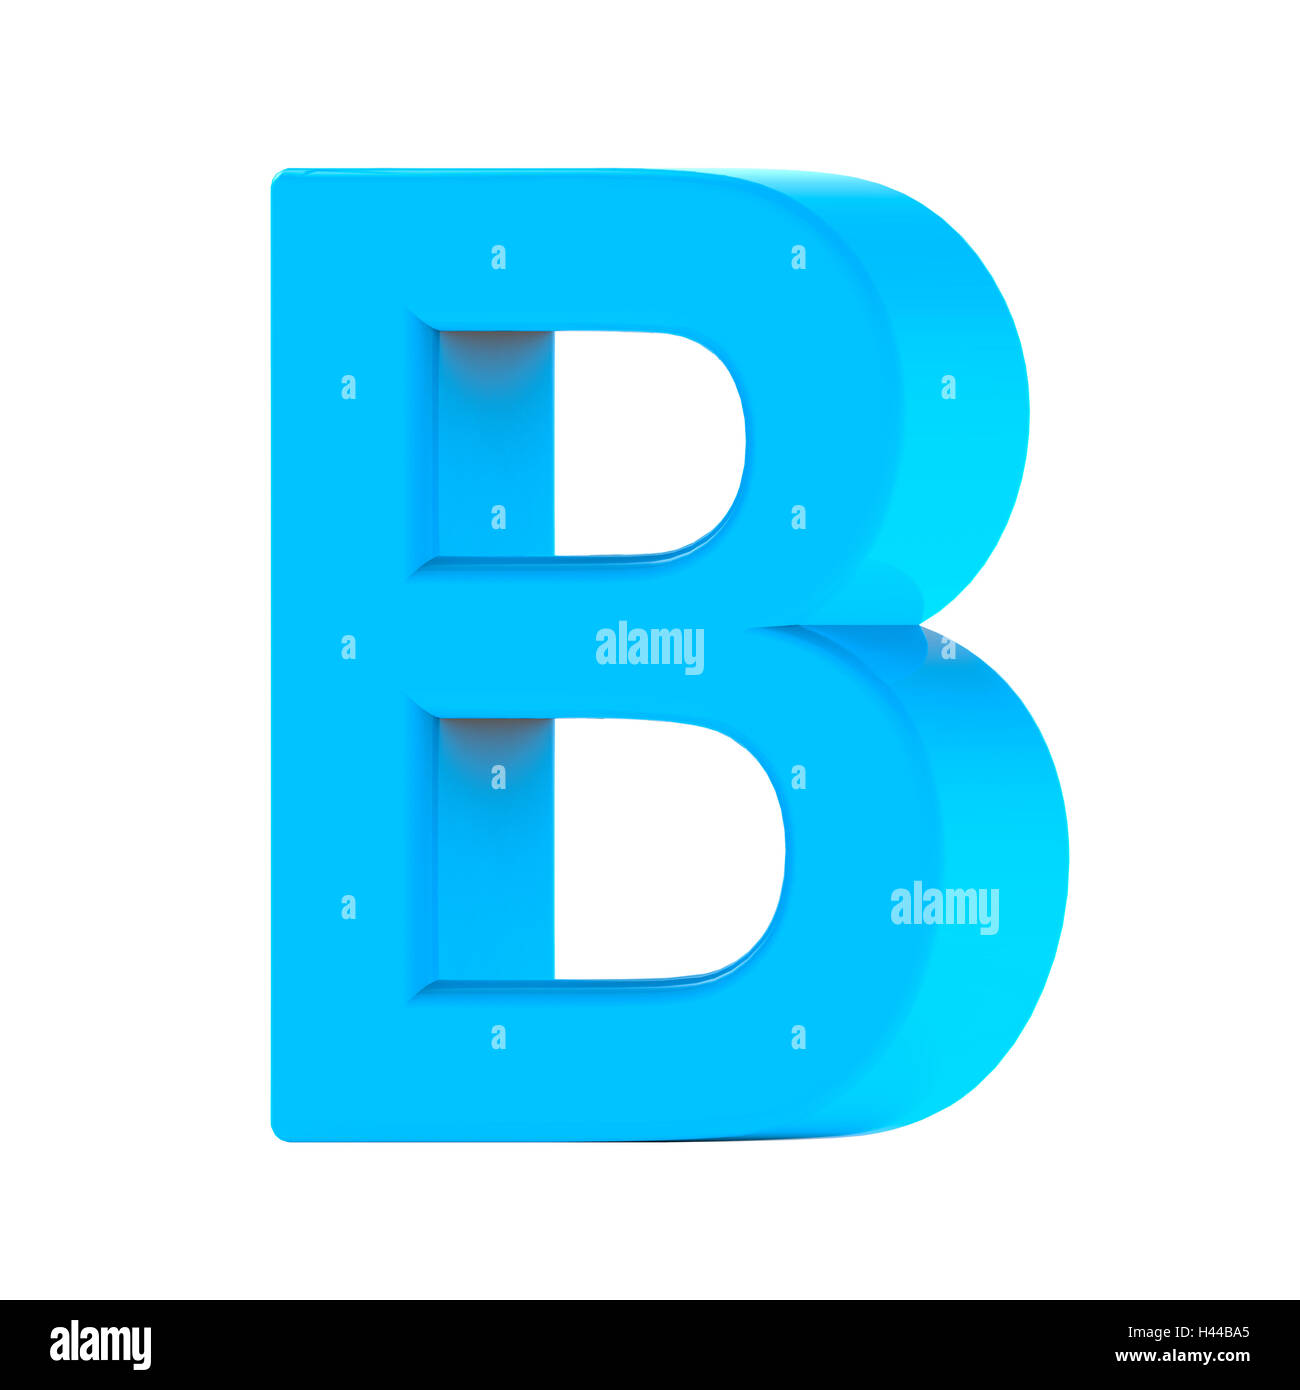 https://c8.alamy.com/comp/H44BA5/3d-right-leaning-light-blue-letter-b-3d-rendering-graphic-isolated-H44BA5.jpg